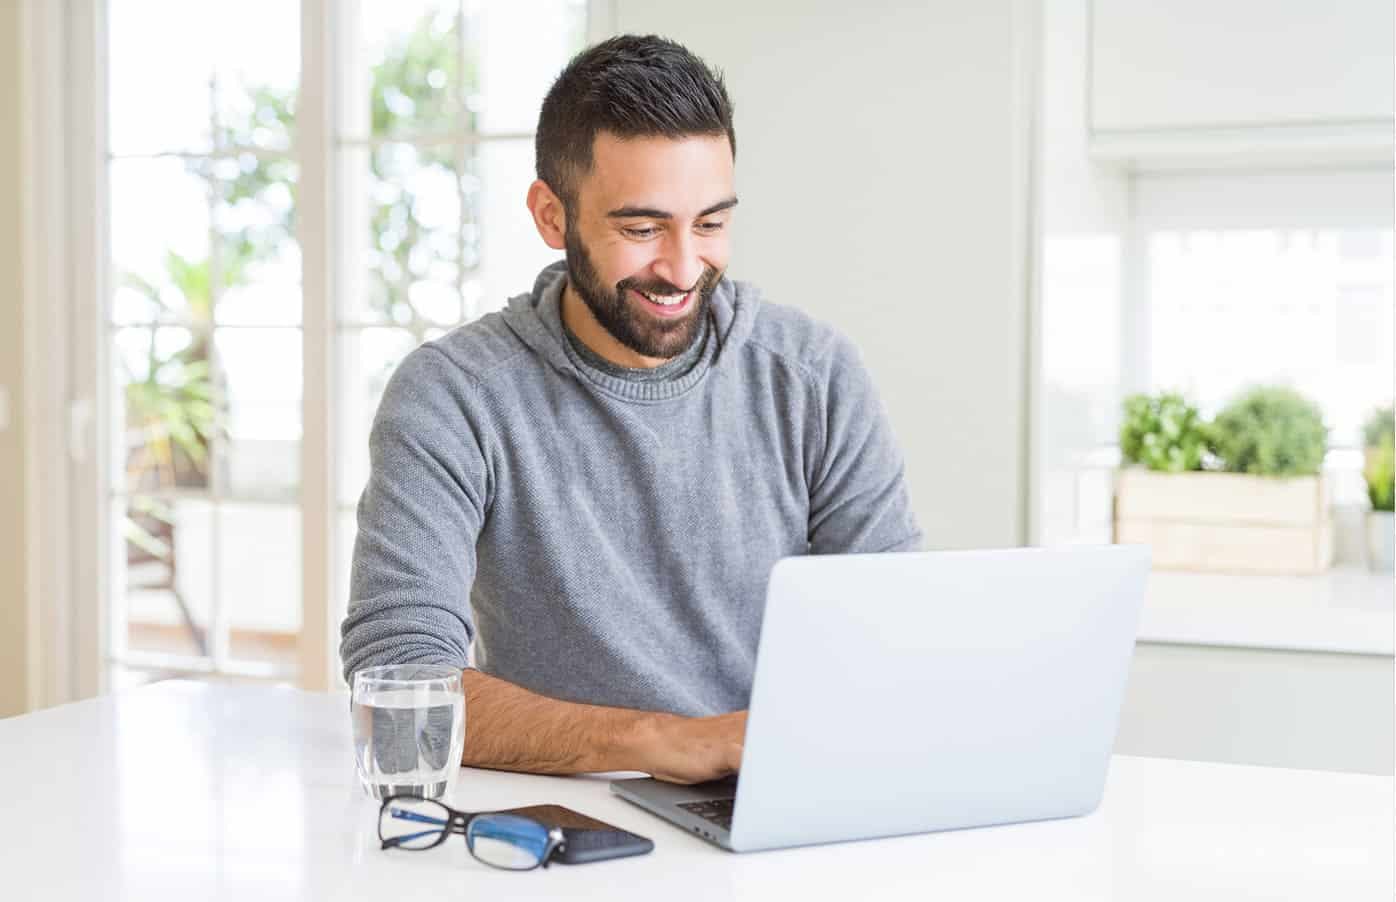 Man working from home on laptop